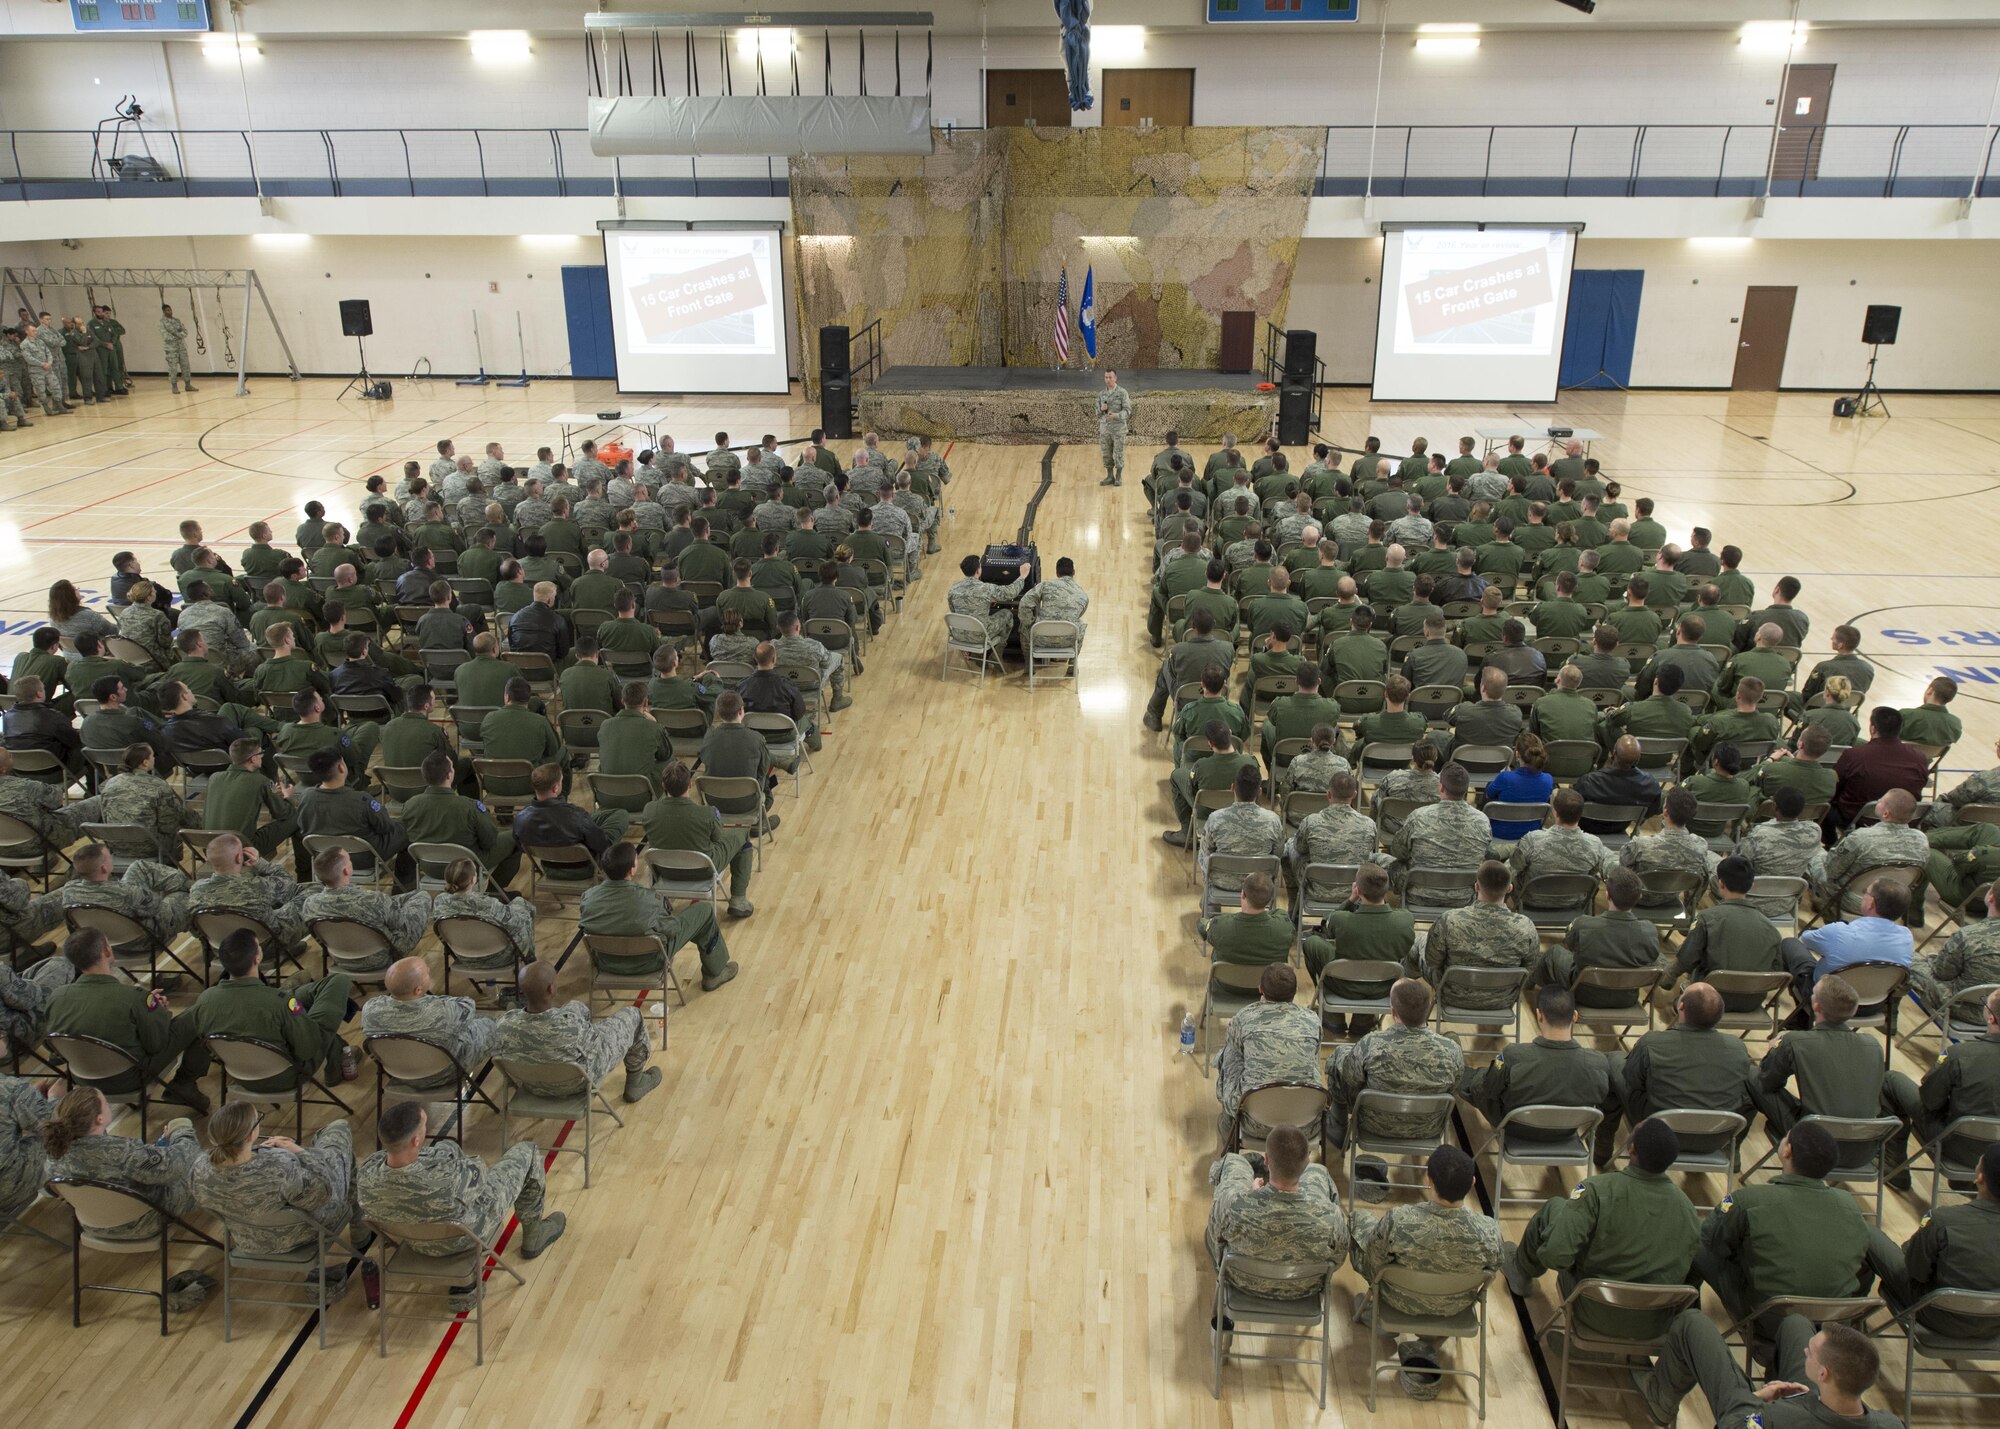 Col. Houston Cantwell, the 49th Wing commander, speaks to Airmen at an all-call on Jan. 3, 2017 at Holloman Air Force Base, N.M. Cantwell discussed the highs and lows of 2016, as well as where the wing is heading for 2017. Specifically, he mentioned the increase in Remotely Piloted Aircraft training and the Wing’s new mission and vision statements. (U.S. Air Force photo by Senior Airman Emily Kenney)